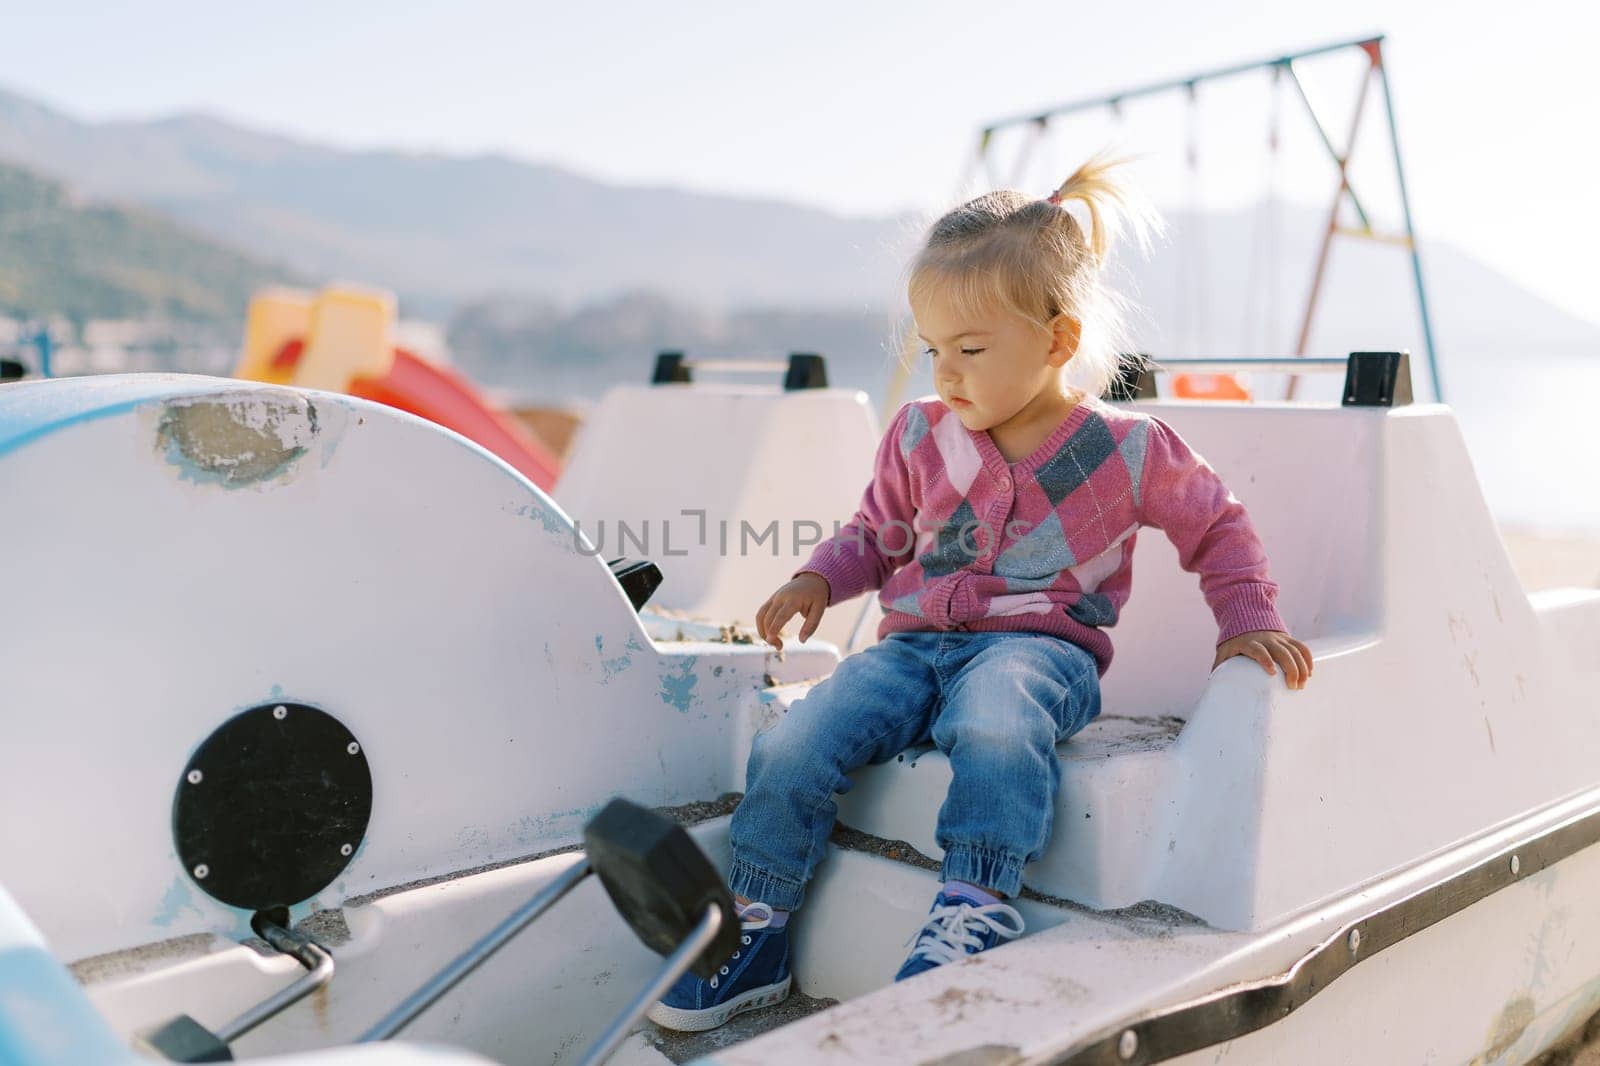 Little girl sits on the seat of a catamaran and looks at the pedals. High quality photo